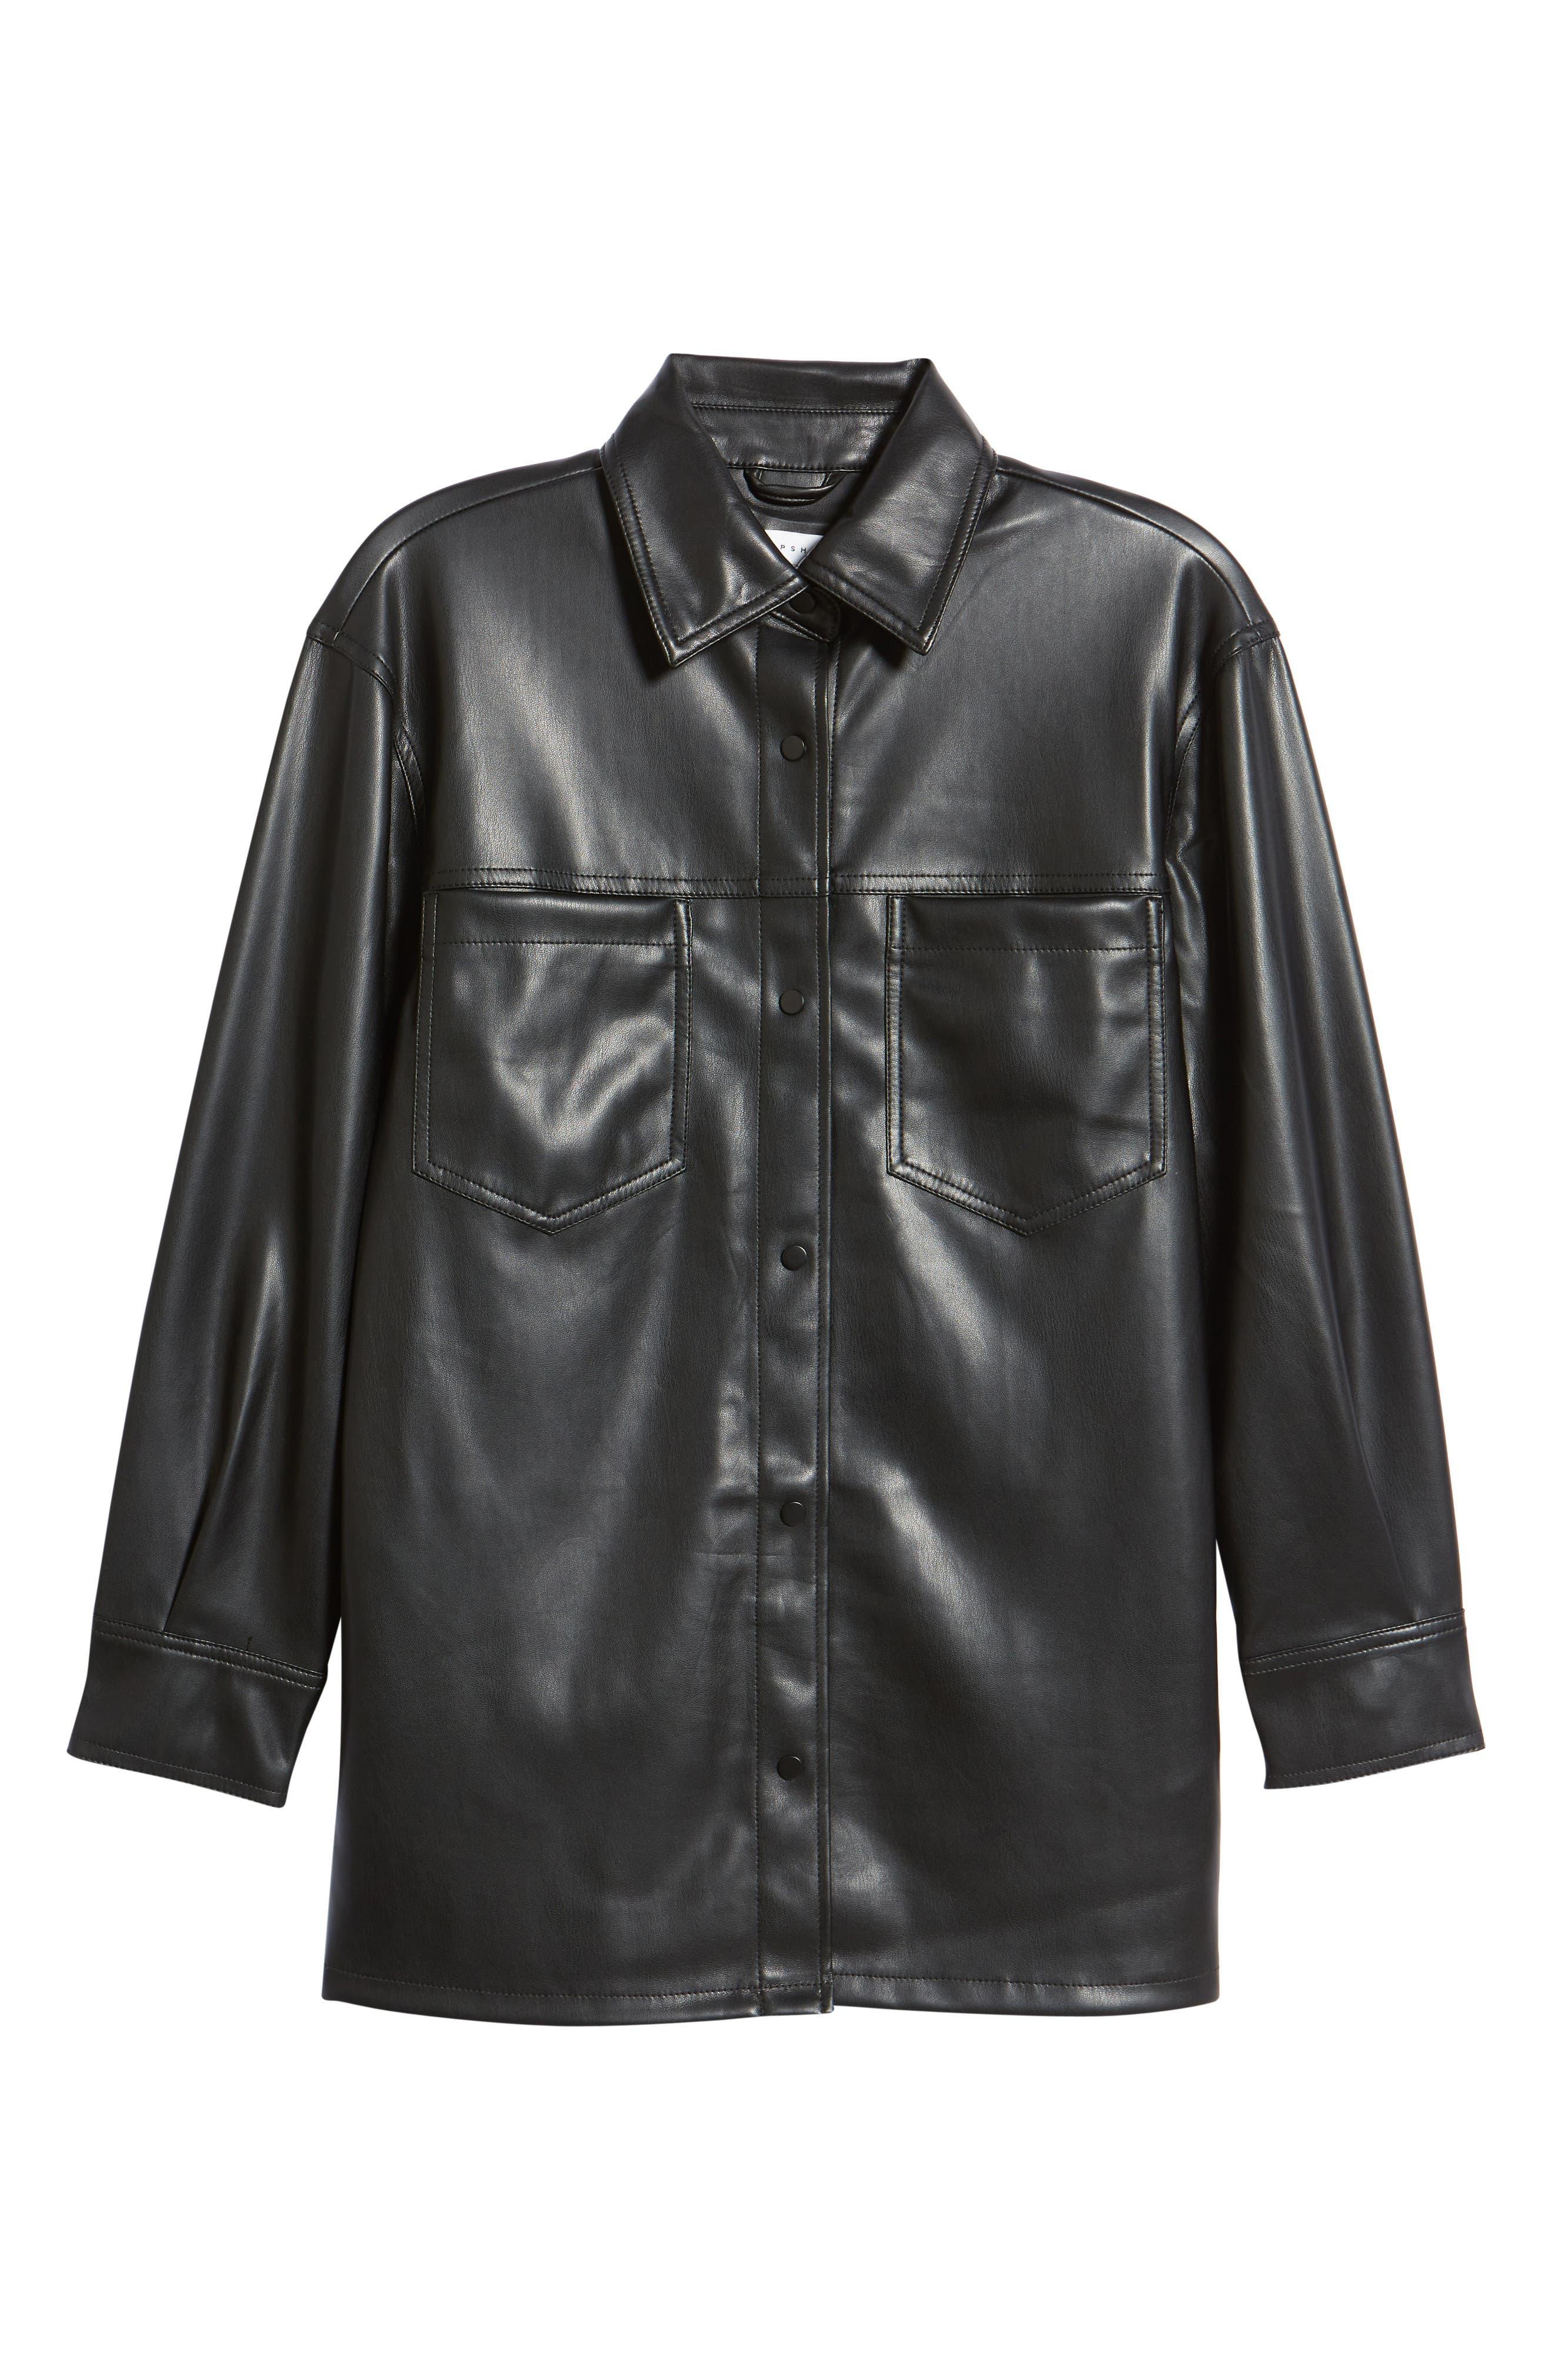 TOPSHOP Faux Leather Shirt in Black | Lyst